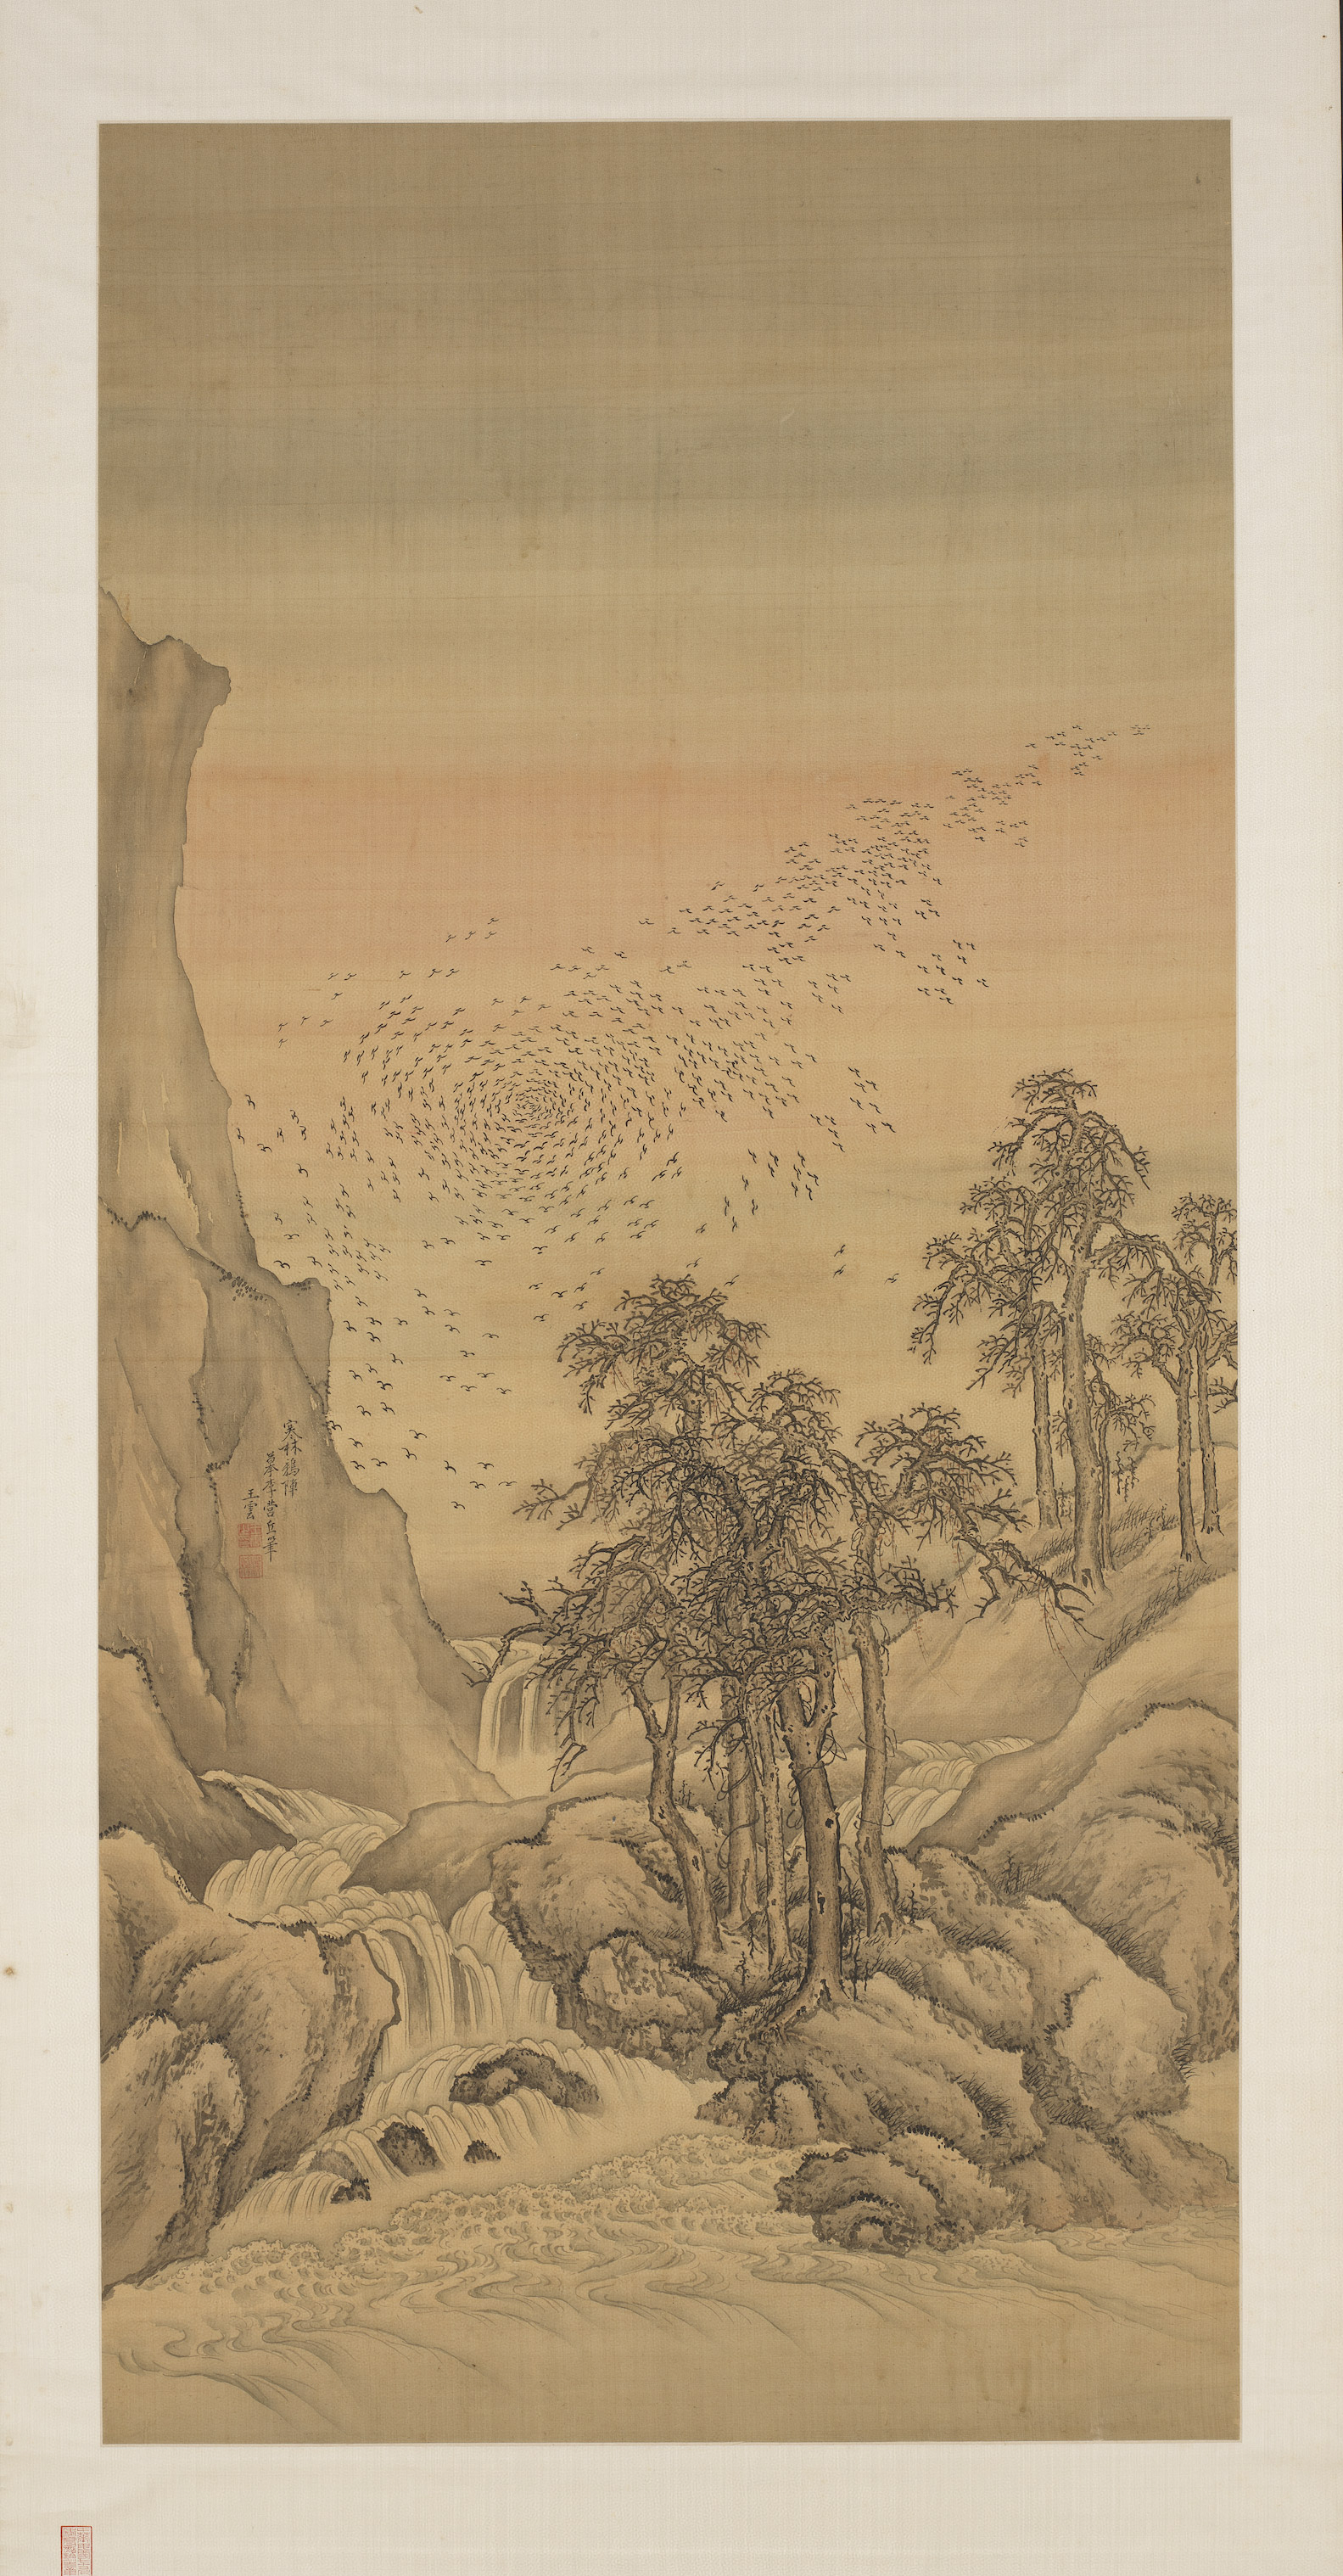 In Imitation of Li Cheng's Flock of Crows and Wintry Trees